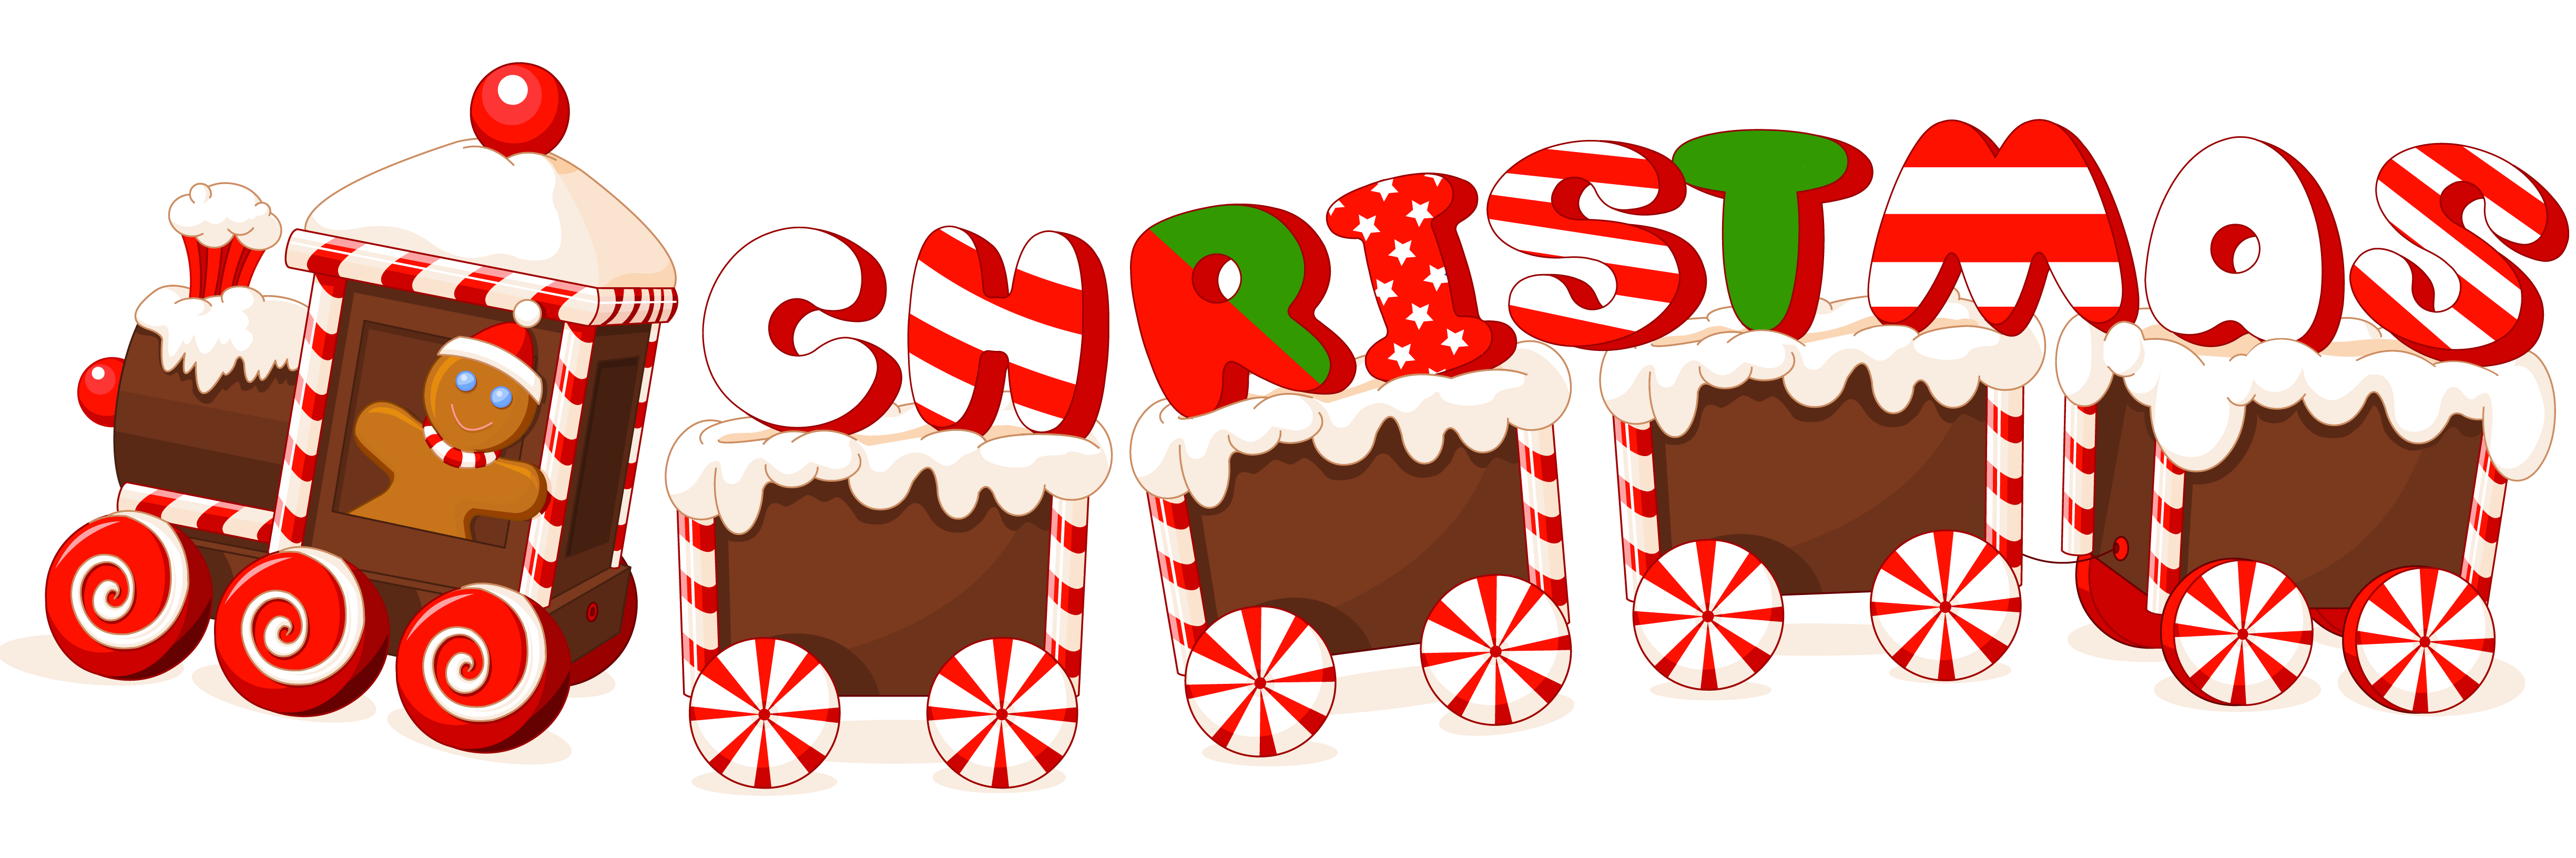 christmas clip art free for emails - photo #13